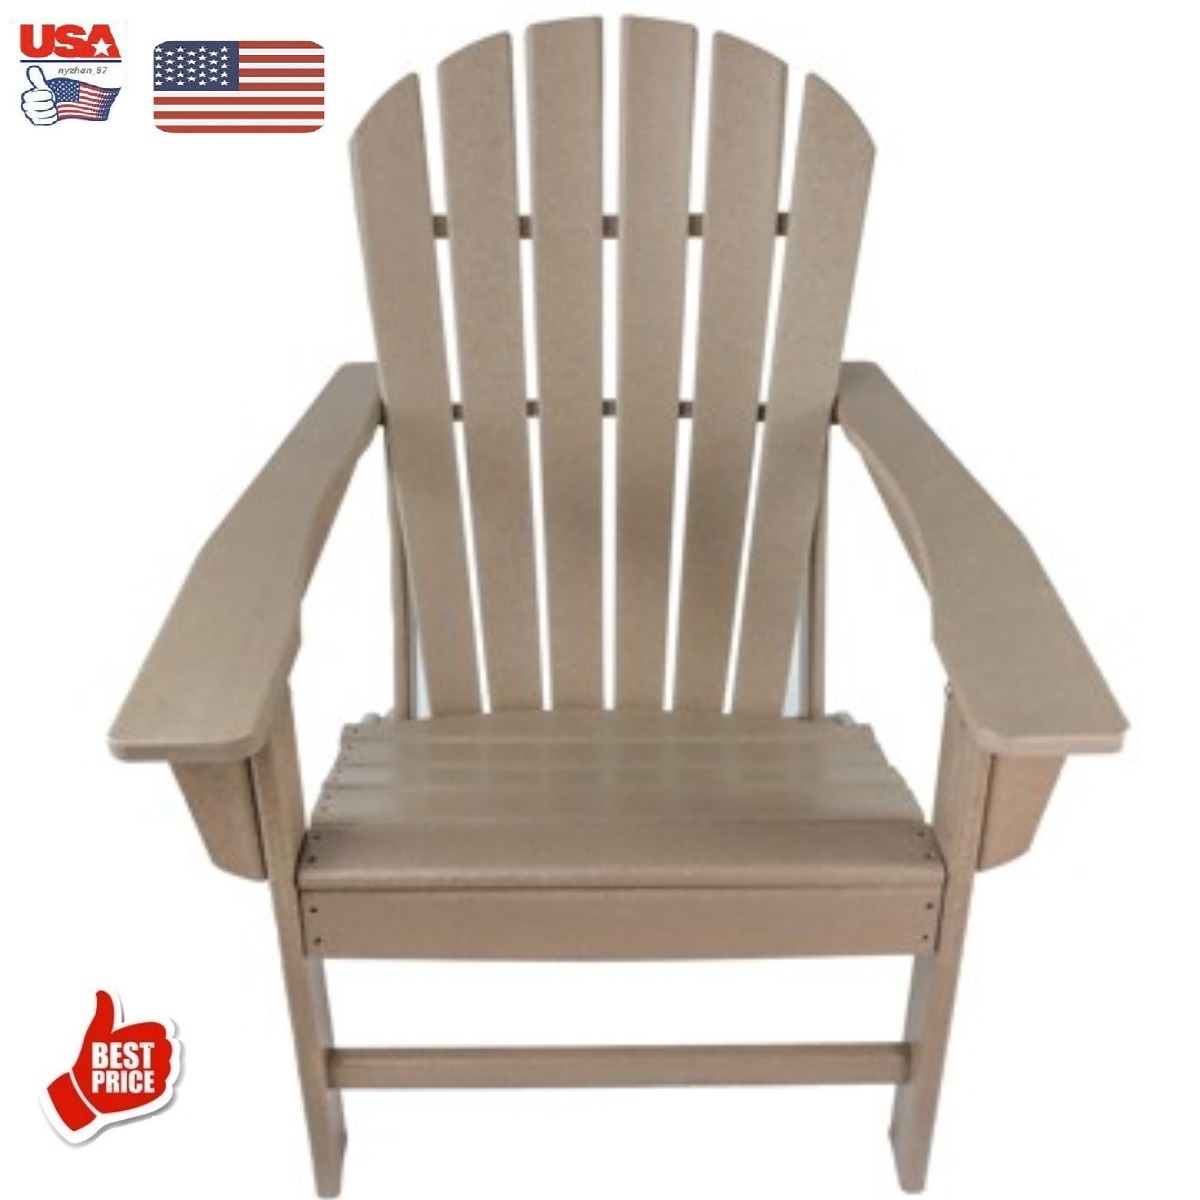 Folding Adirondack Chair Patio Chair Lawn Chair Outdoor 350 lbs Capacity Load Adirondack Chairs Weather Resistant for Patio Deck Garden 33.07*31.1*36.4" HDPE Resin Wood,Brown - image 2 of 8